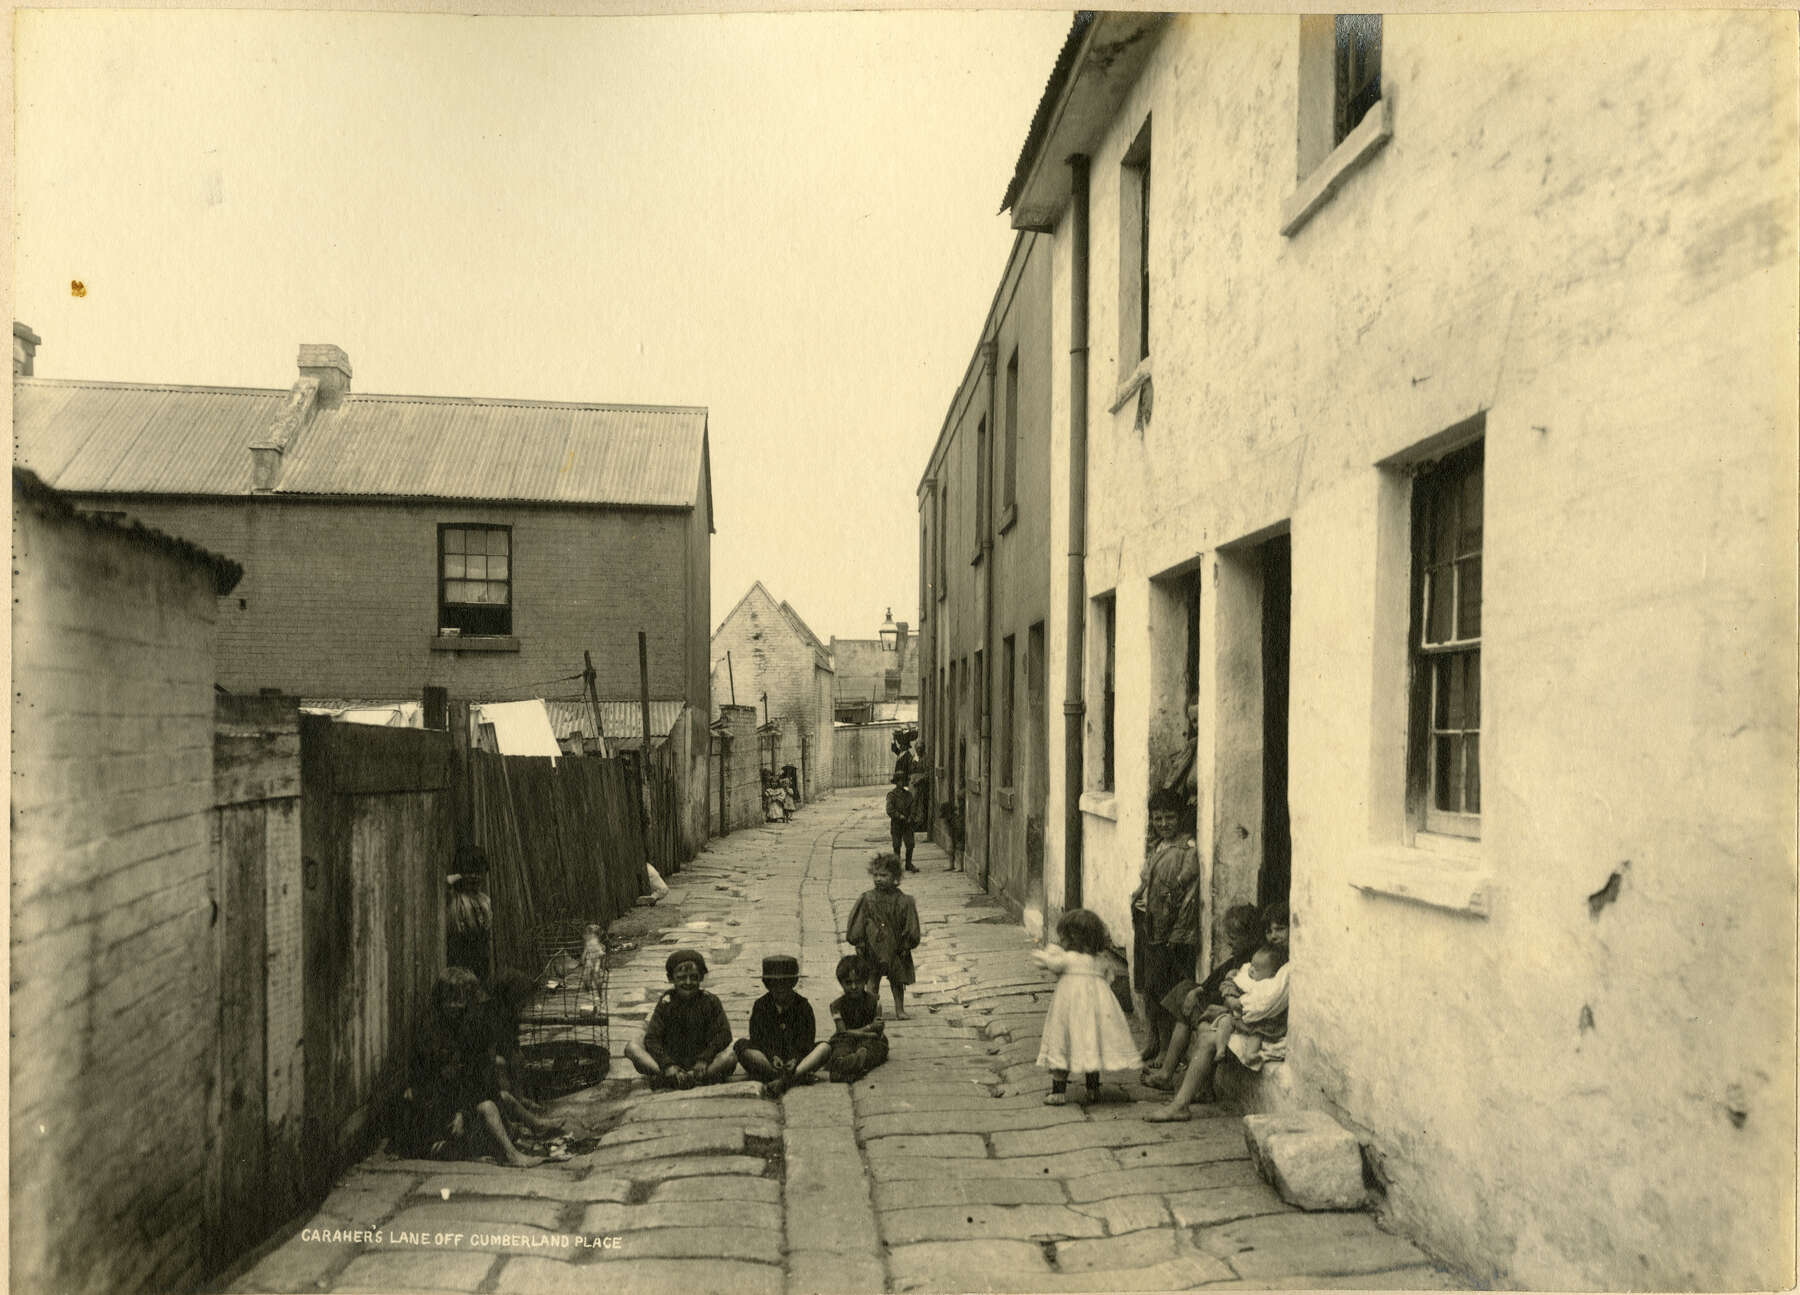 Old sepia photograph of a small lane with houses on each side and children hanging out on the walkway.